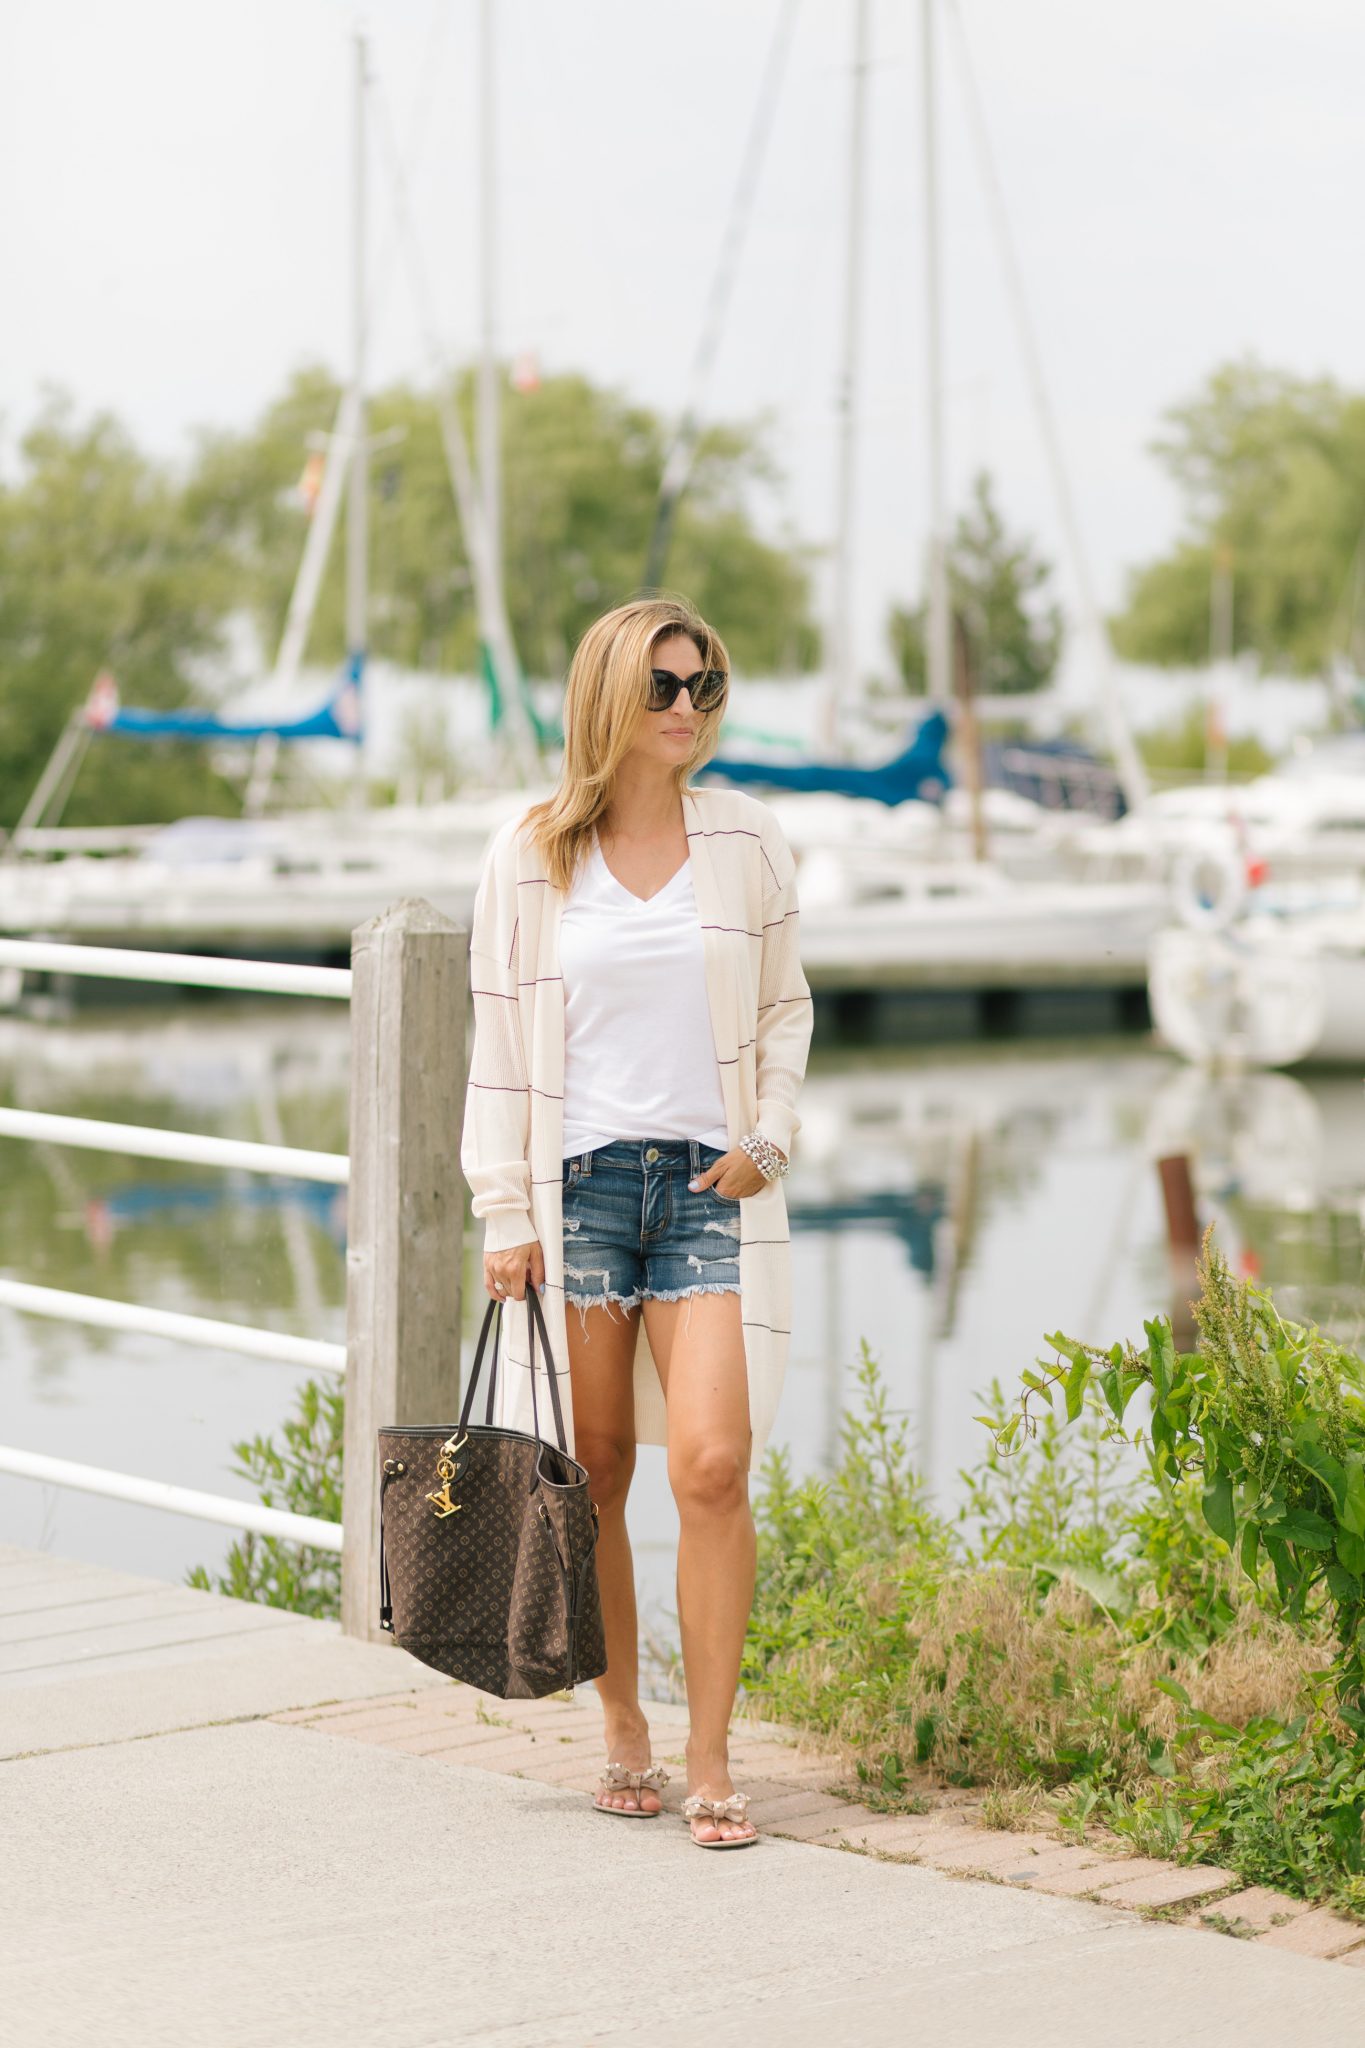 Summer striped cardi with cut off jean shorts, Louis Vuitton neverfull